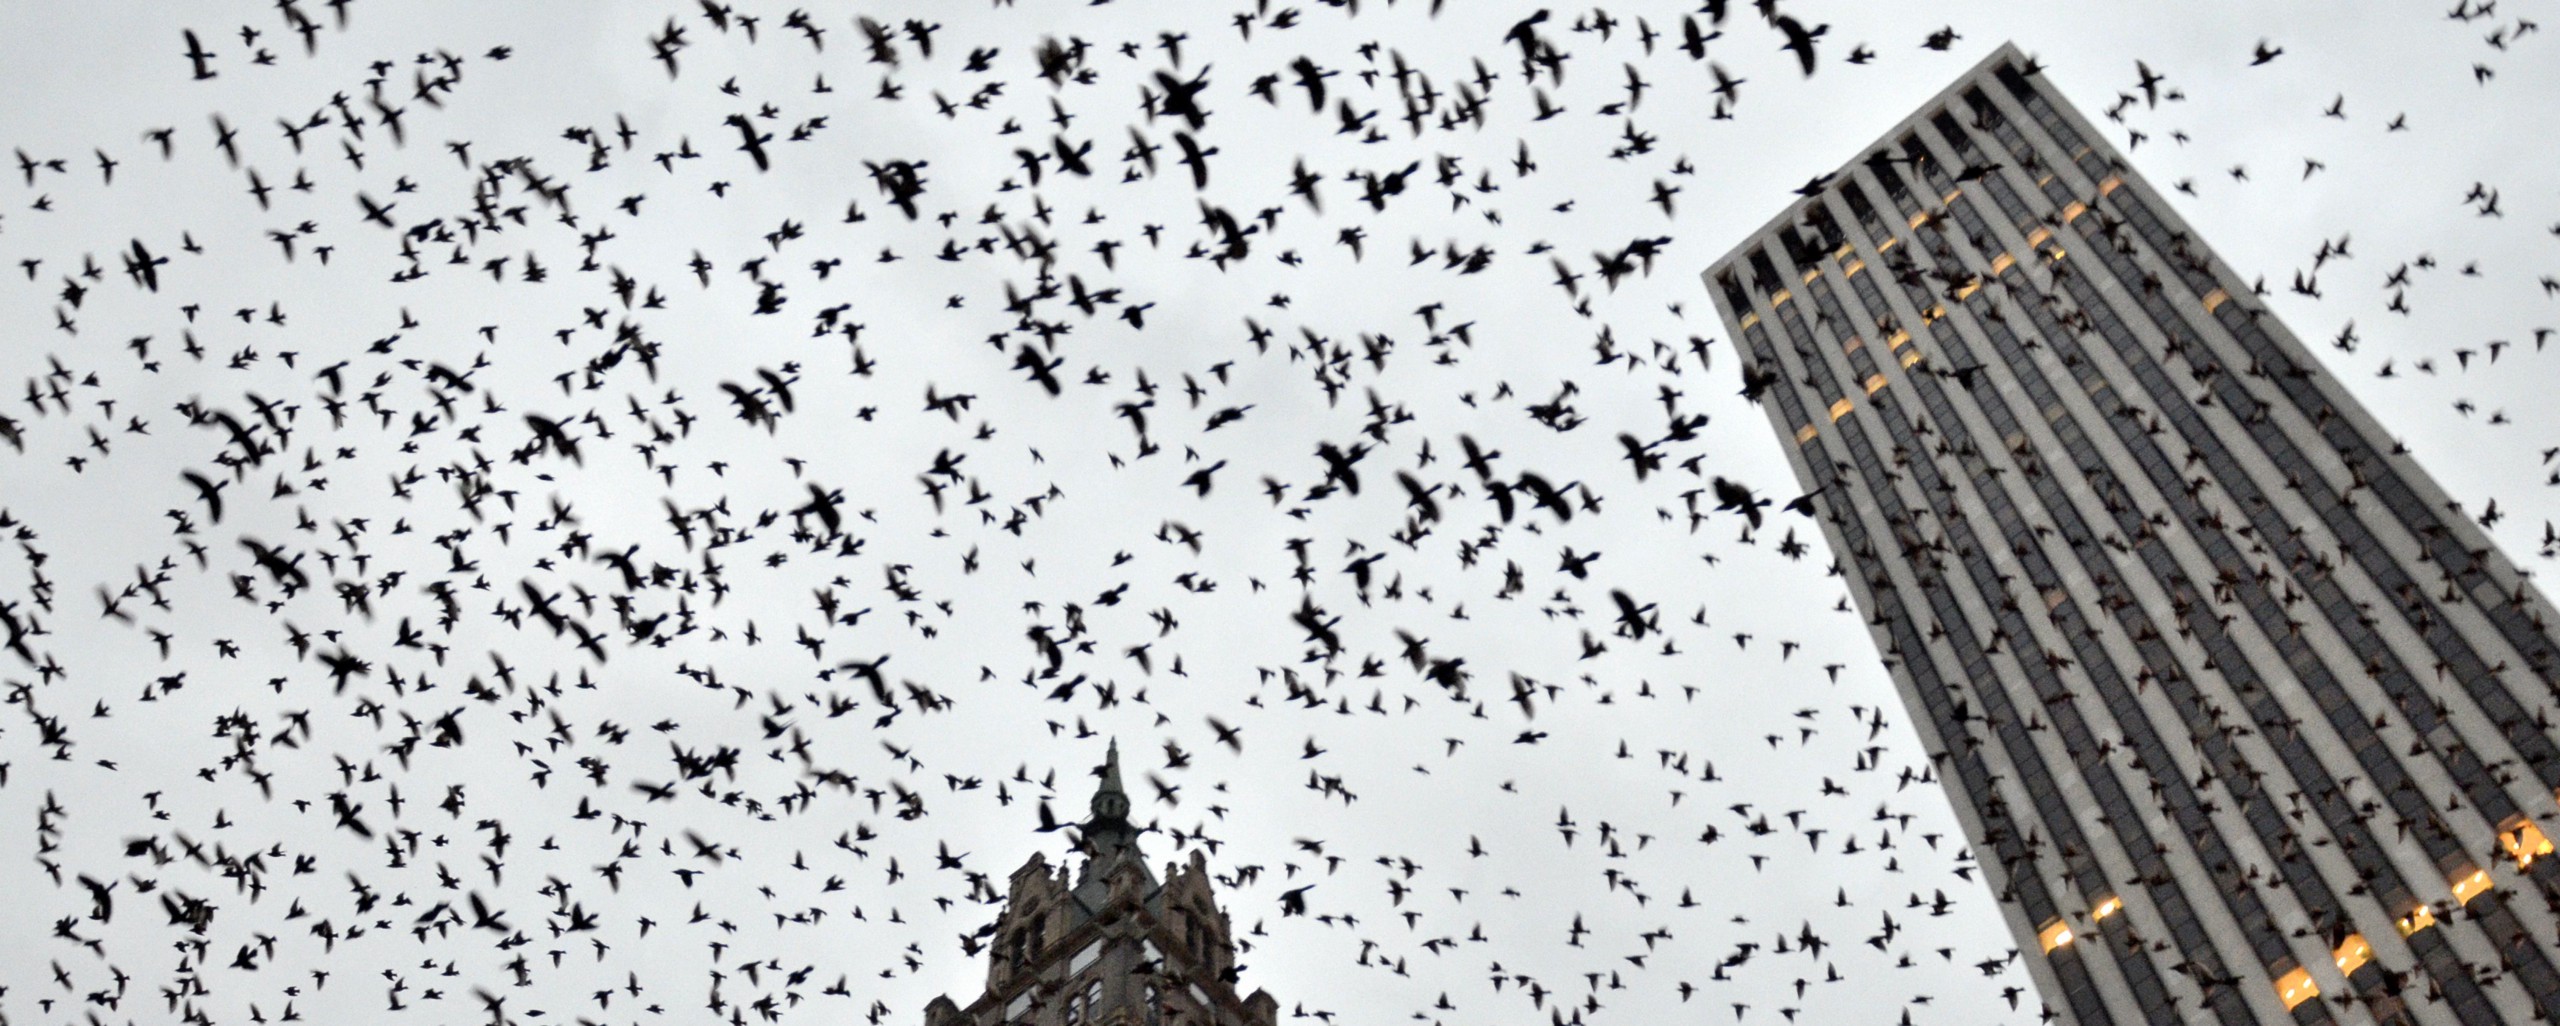 A dense flock of birds flying past skyscrapers.